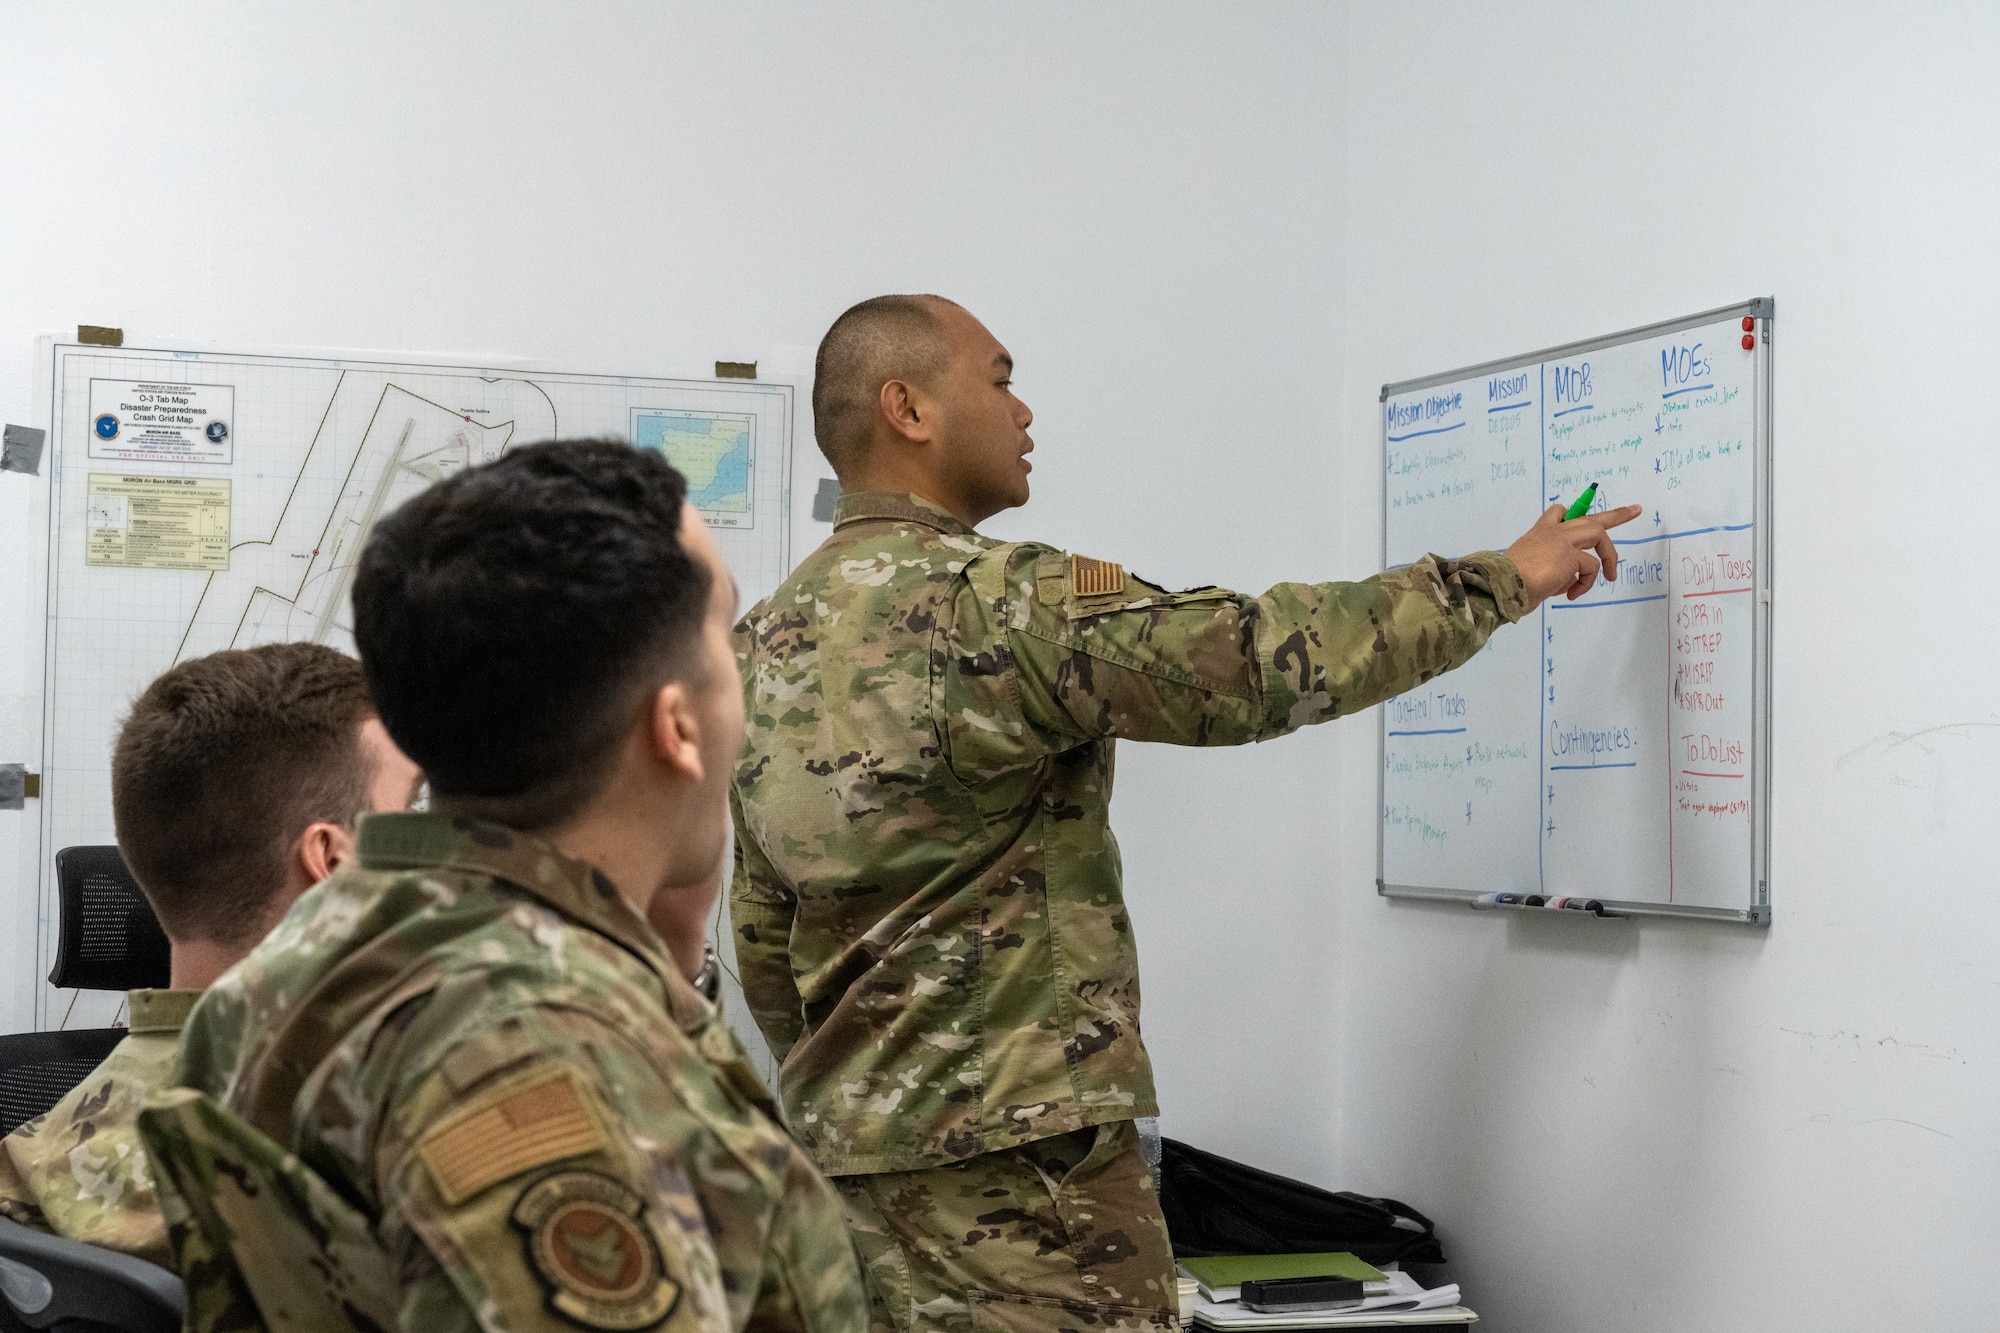 First Lt. John Paul Fernandez, 22nd Communications Squadron Mission Defense Team officer in charge, leads a planning session for a network surveillance mission March 23, 2022, at Morón Air Base, Spain. In these missions, Airmen monitor their assigned networks for malicious actions to establish a baseline of regular activity or identify threats. (U.S. Air Force photo by Staff Sgt. Nathan Eckert)